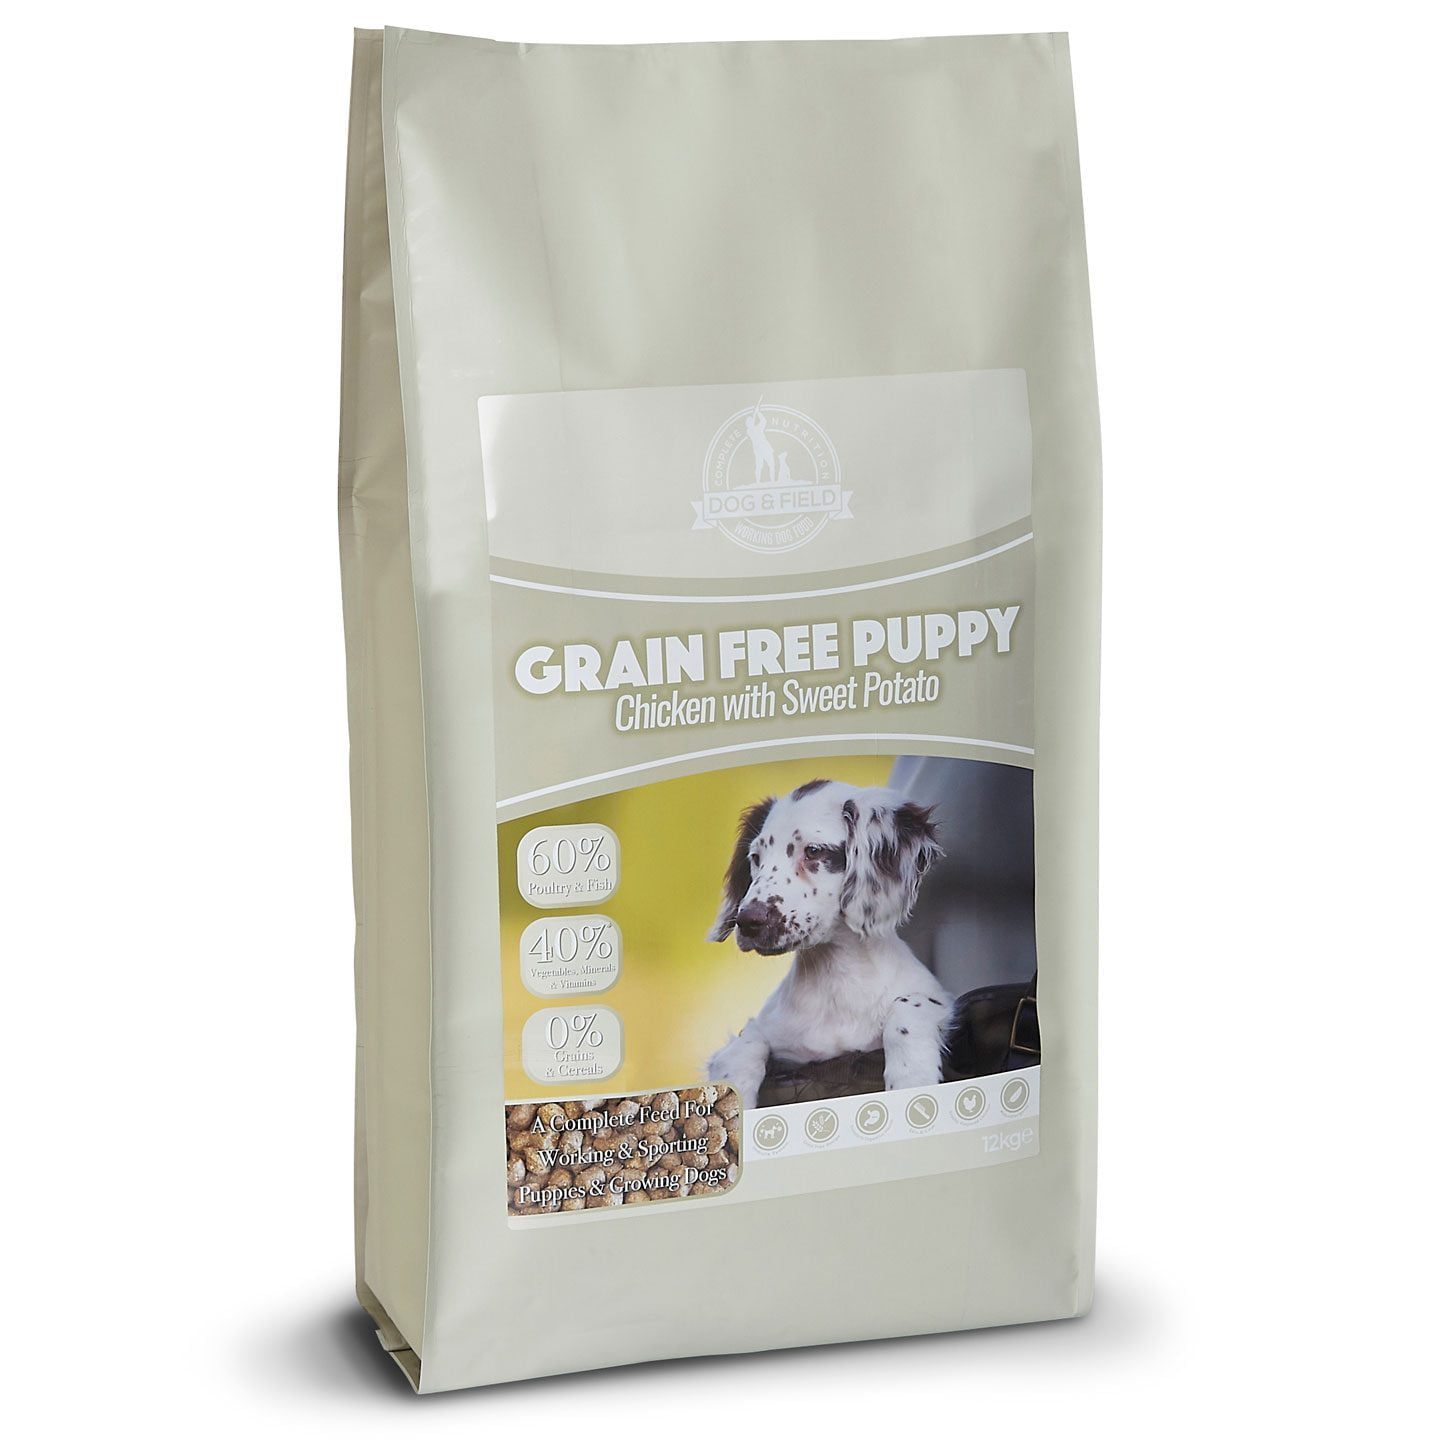 Open Farm: Pet food company using real, ethically-sourced meat products. Its cat and dog offerings exclusively utilize humanely-raised ingredients.